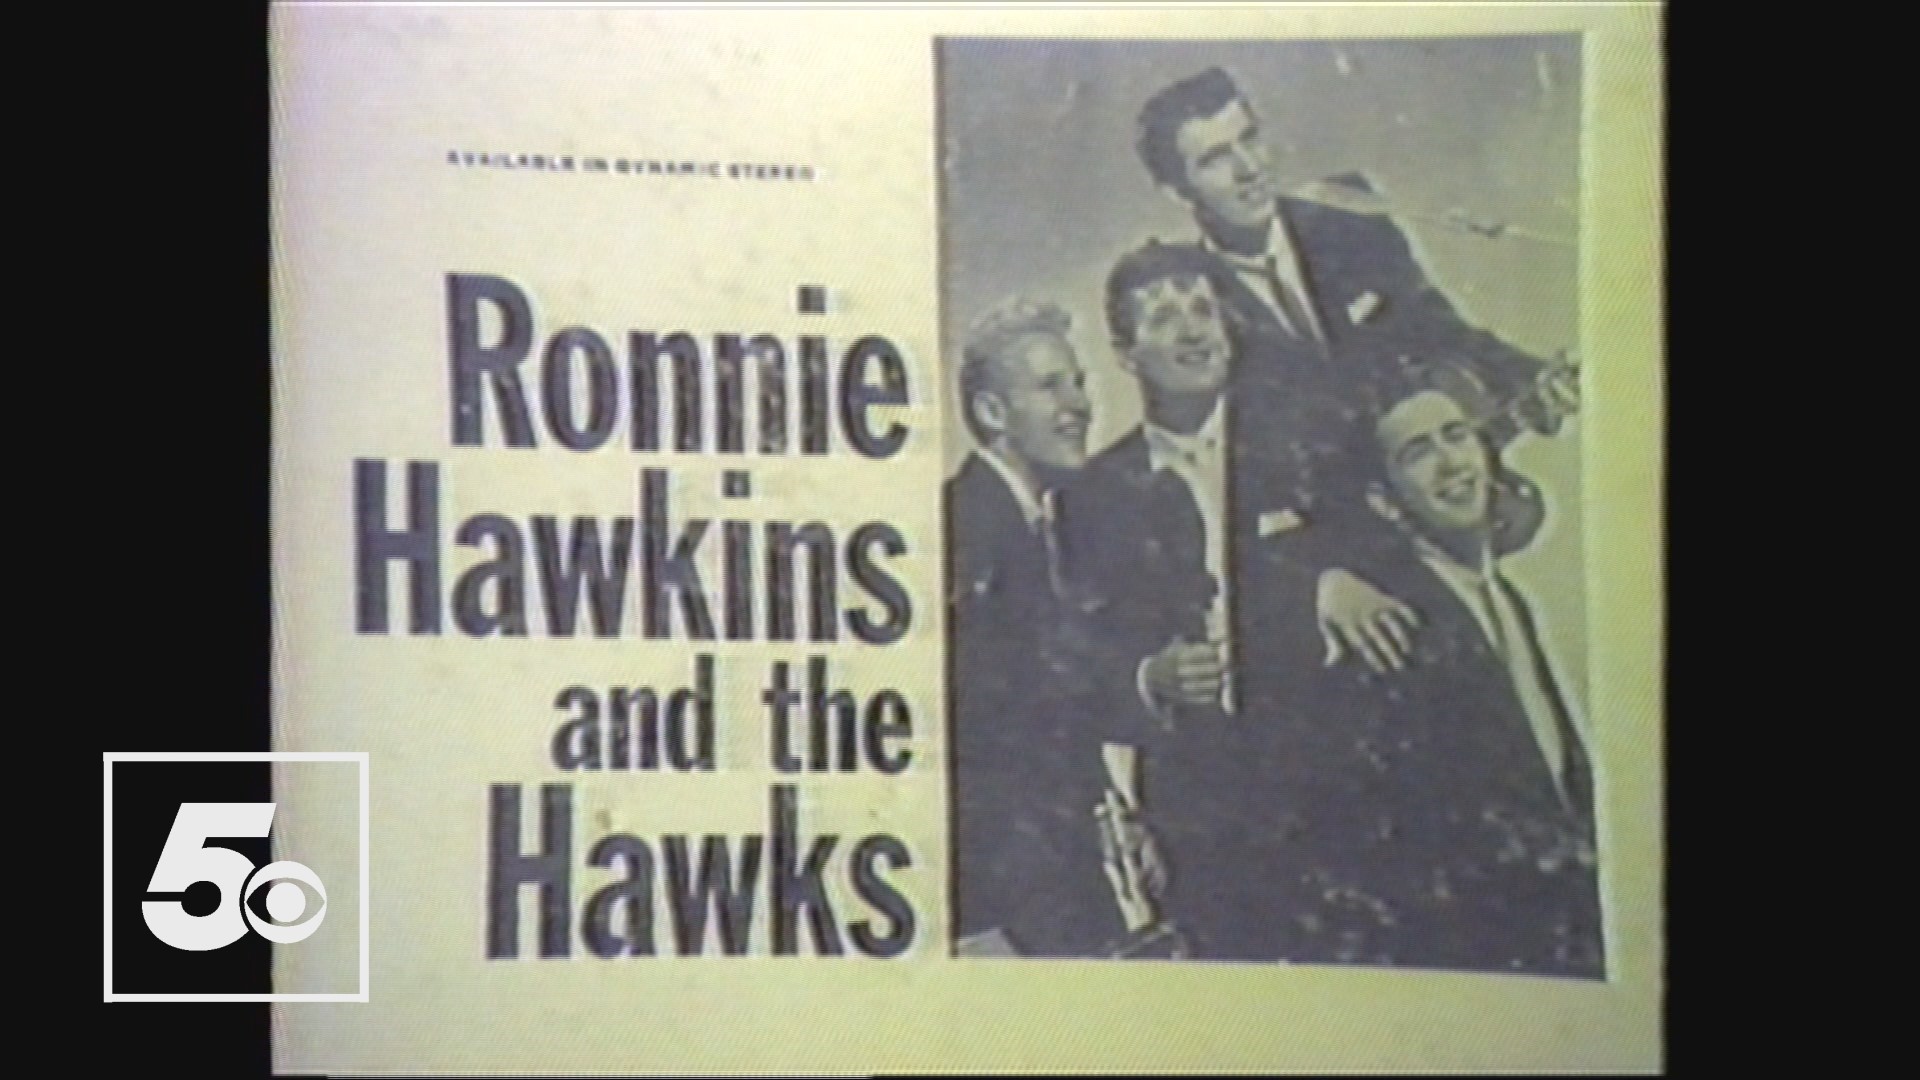 Ronnie Hawkins of Rockabilly fame stopped in Fayetteville to record a portion of a documentary.